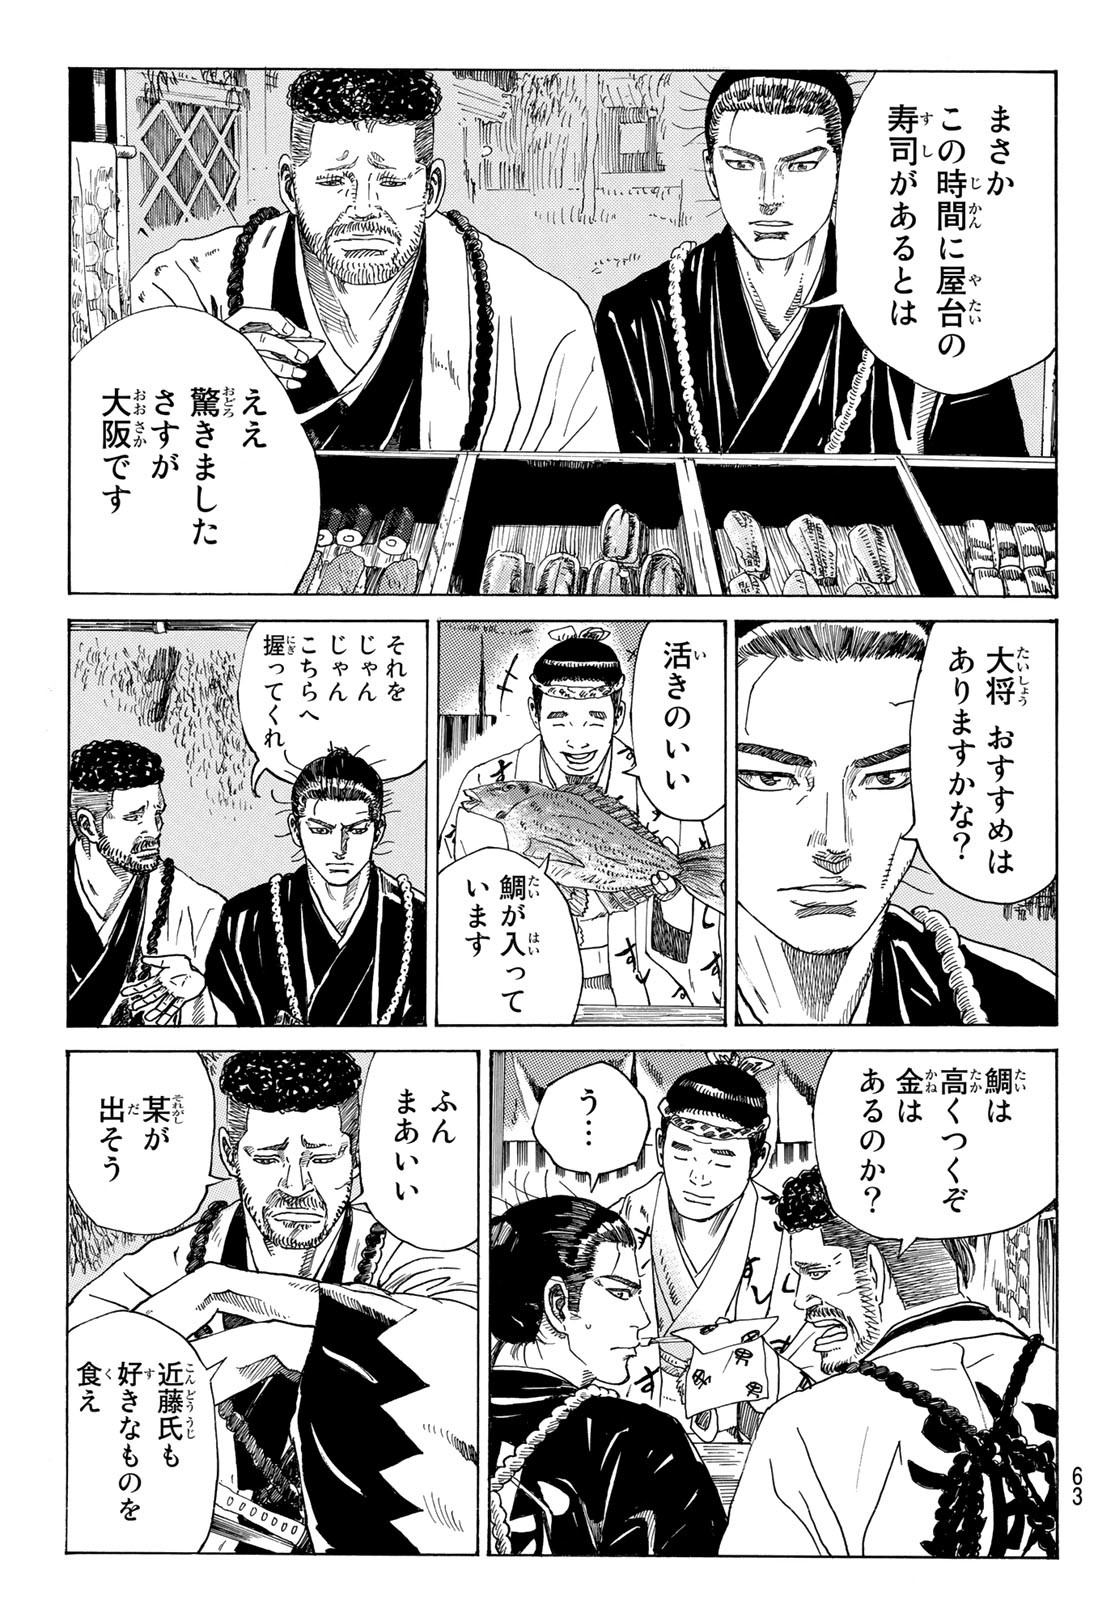 An Mo Miburo 第79話 - Page 5